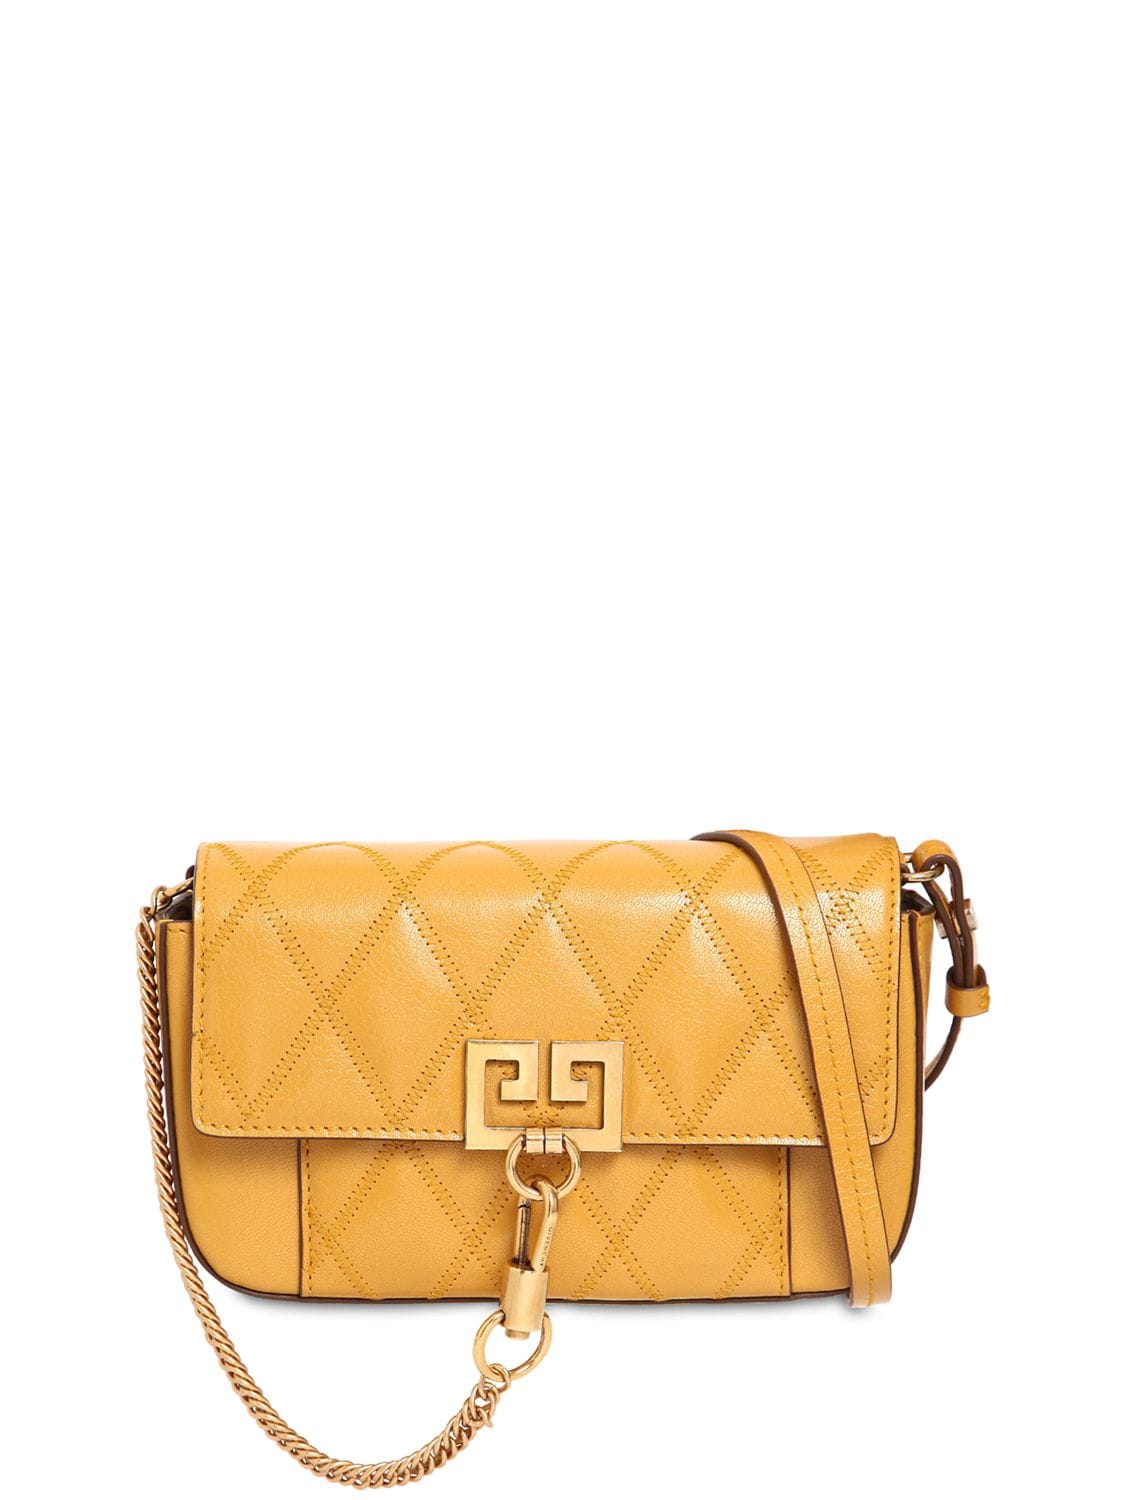 Givenchy Mini Pocket Quilted Leather Shoulder Bag In Mustard